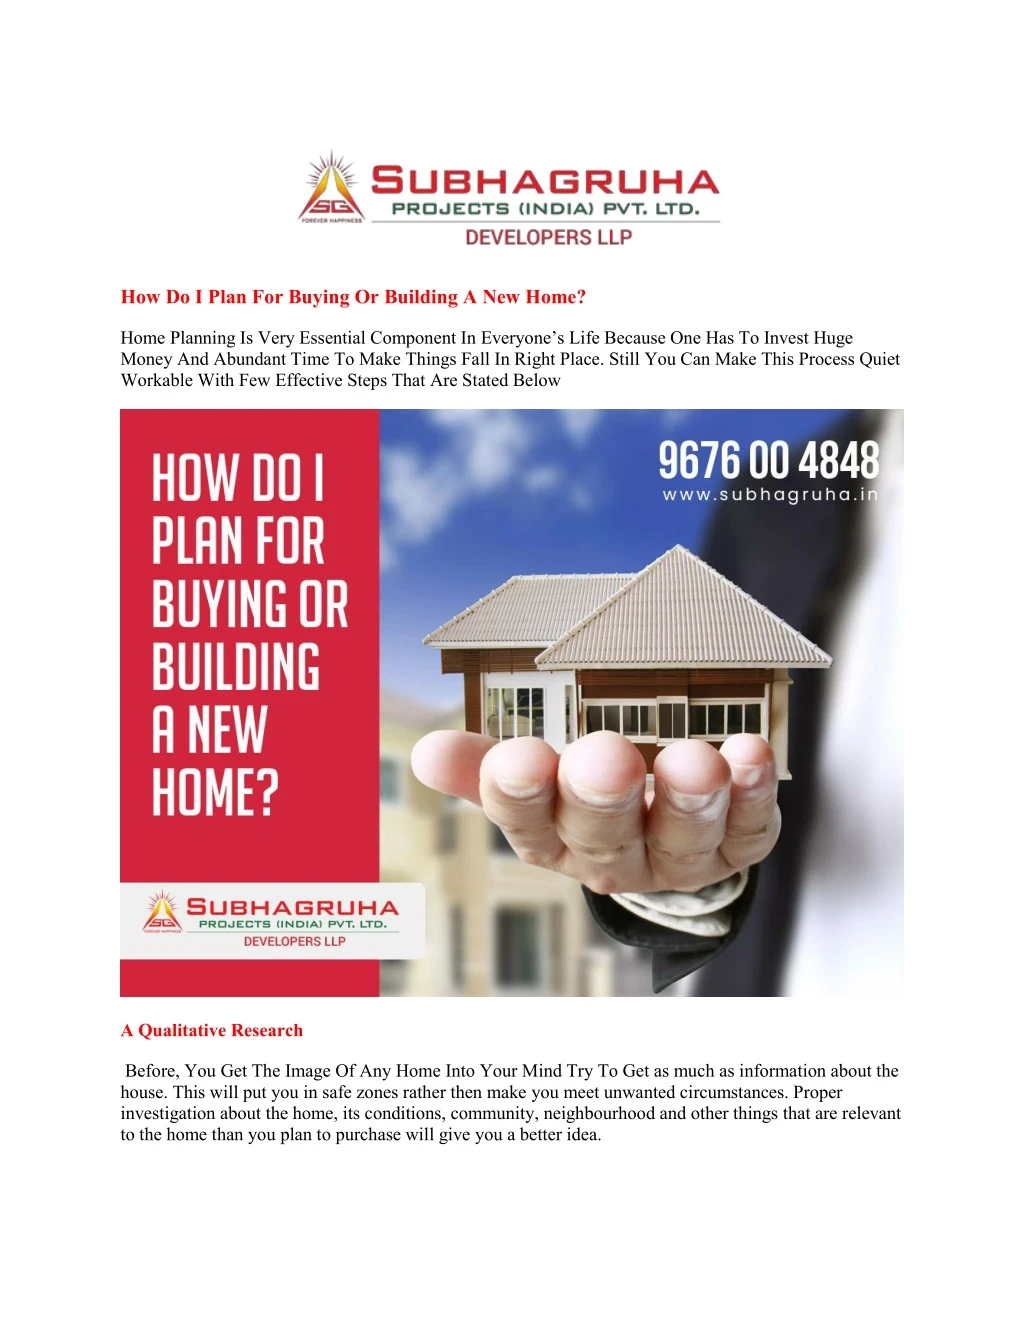 how do i plan for buying or building a new home